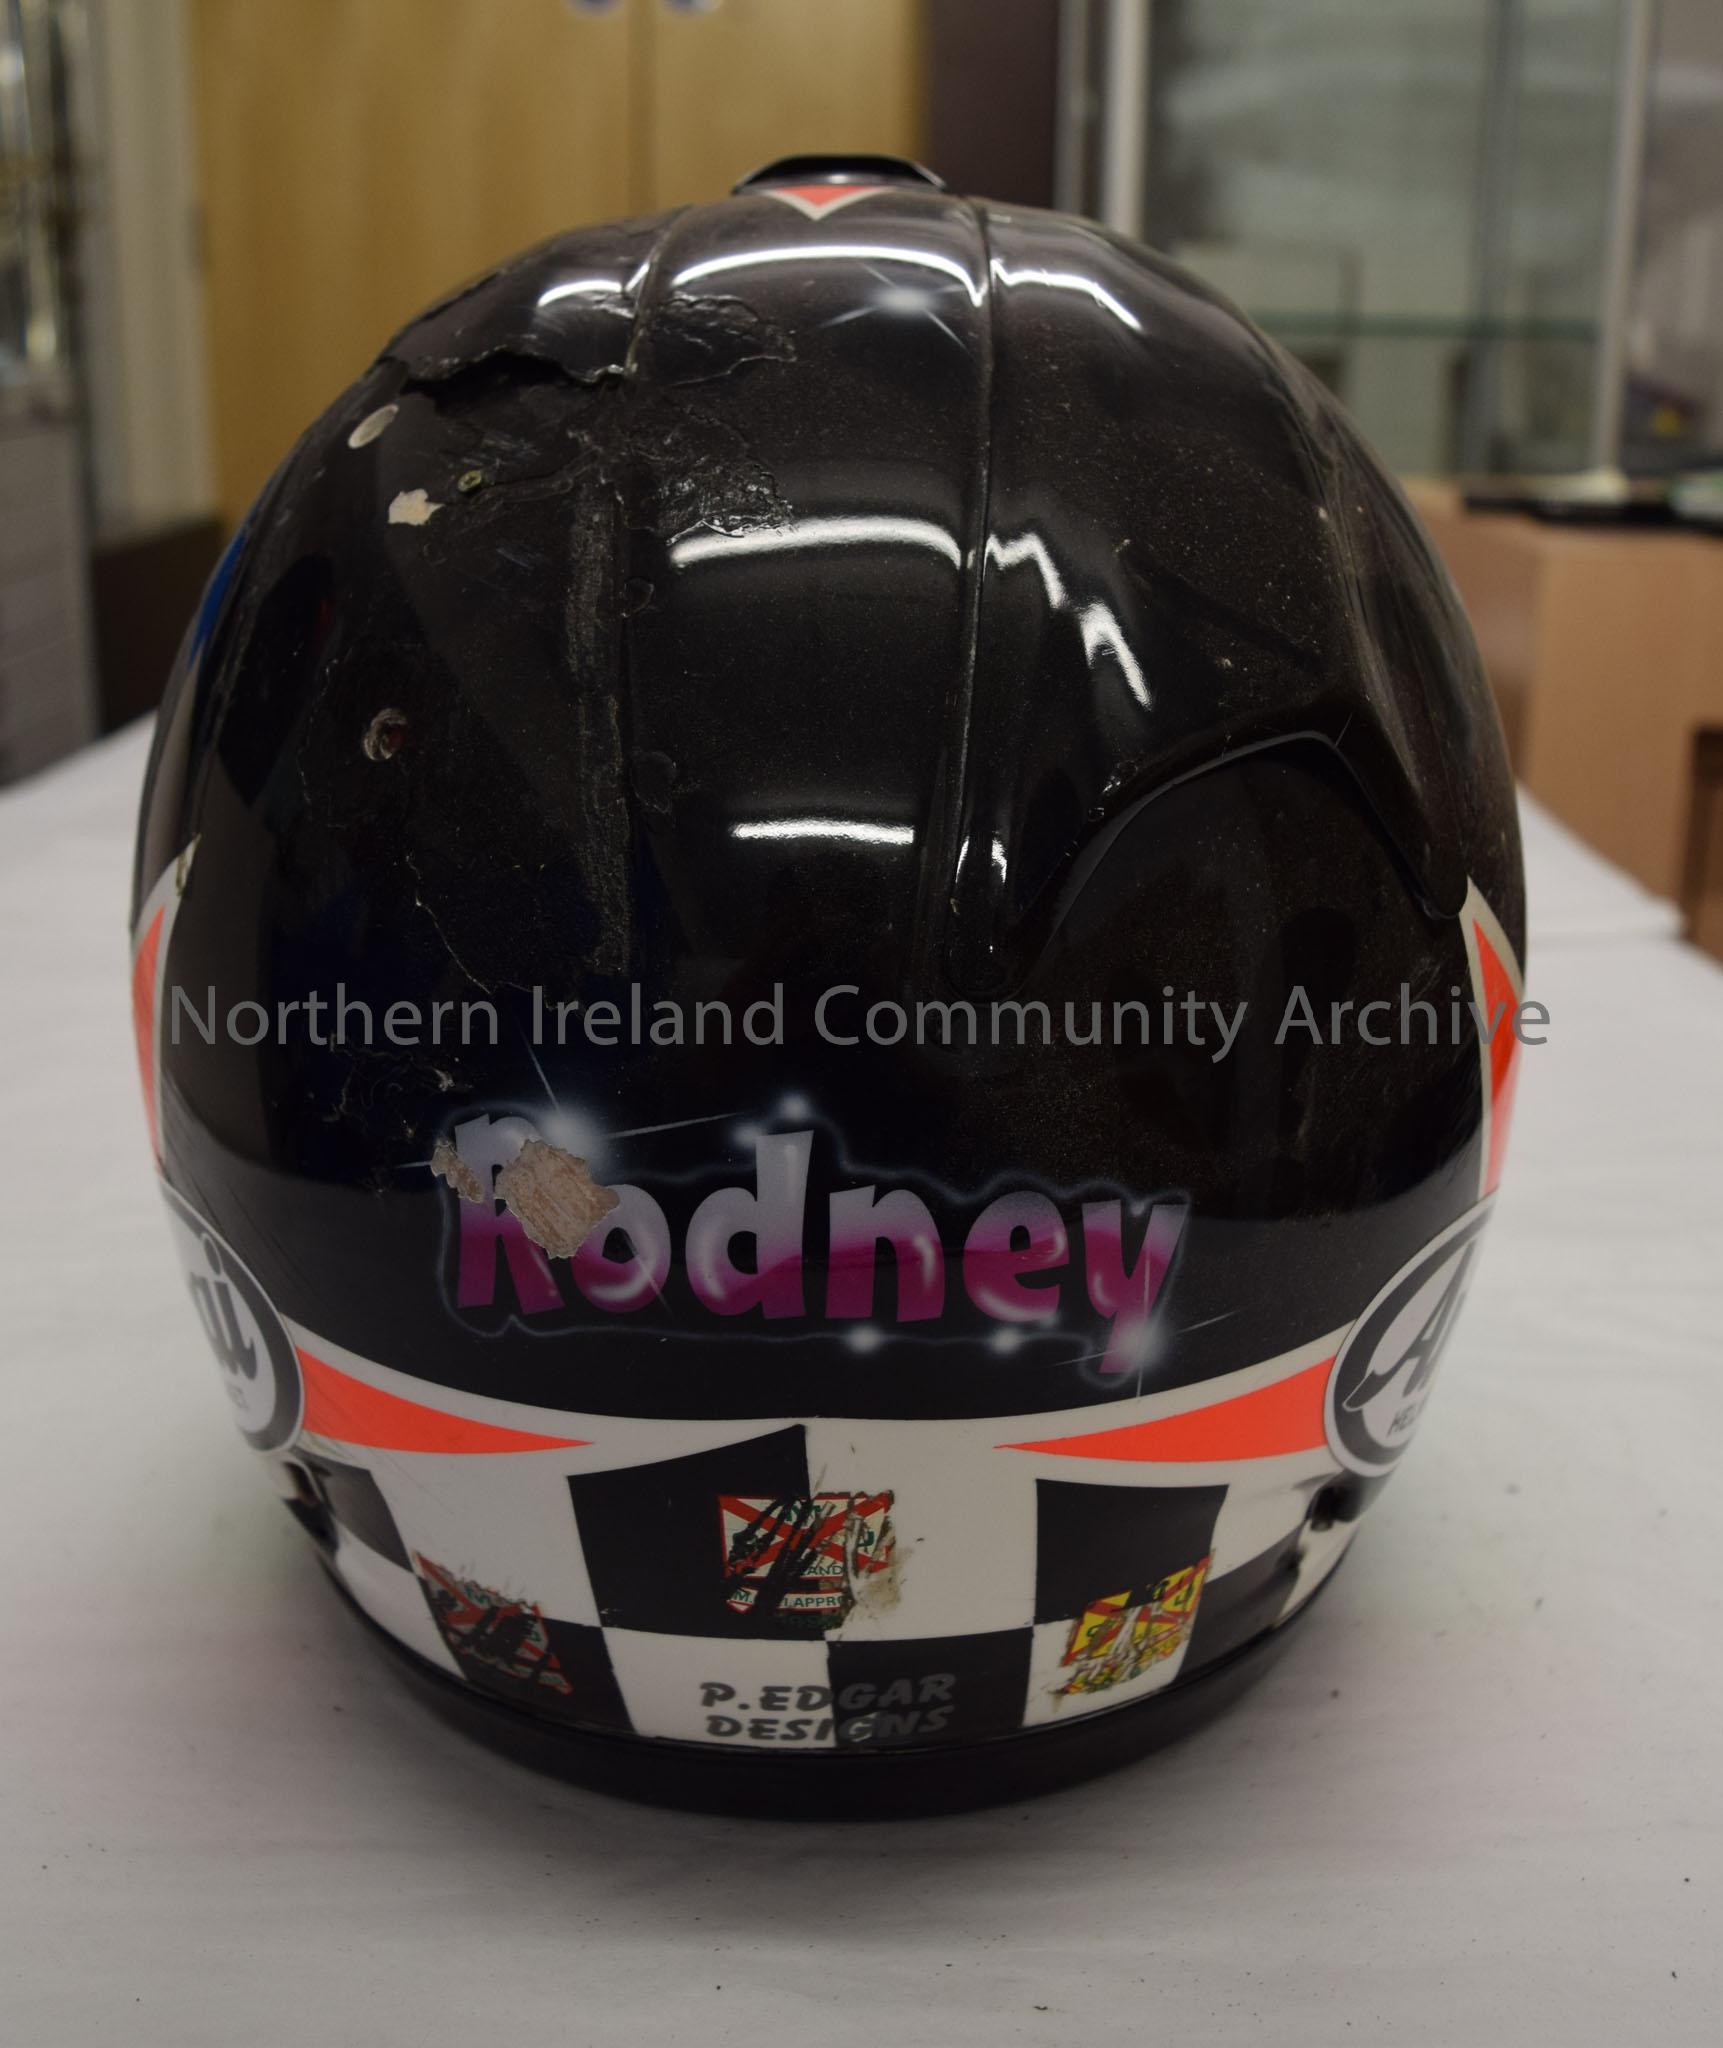 Arai motorcycle helmet belonging to Rodney McCurdy. Black helmet with top of a star in orange at the front and two bright orange stars on the side. Ch… – 2016.97 (4)